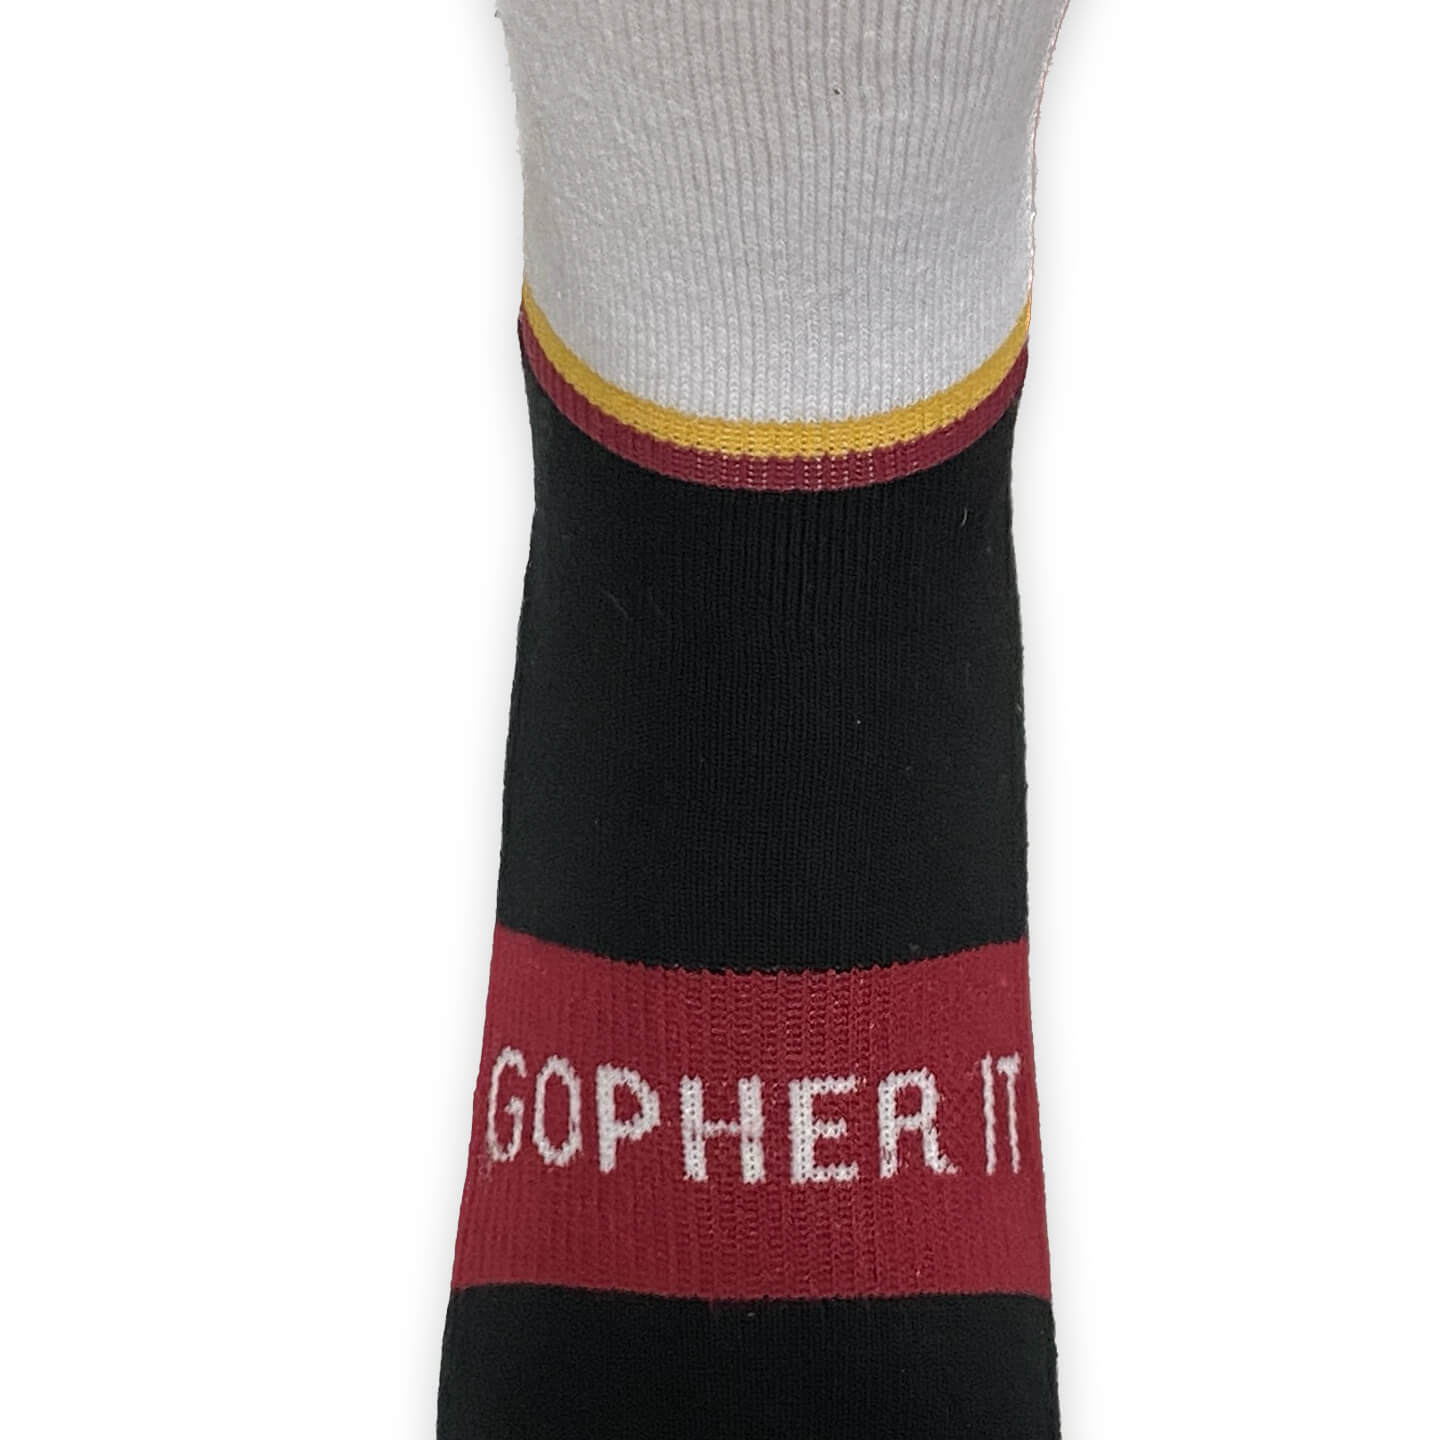 Minnesota crew socks in Maroon and Gold Gopher it view